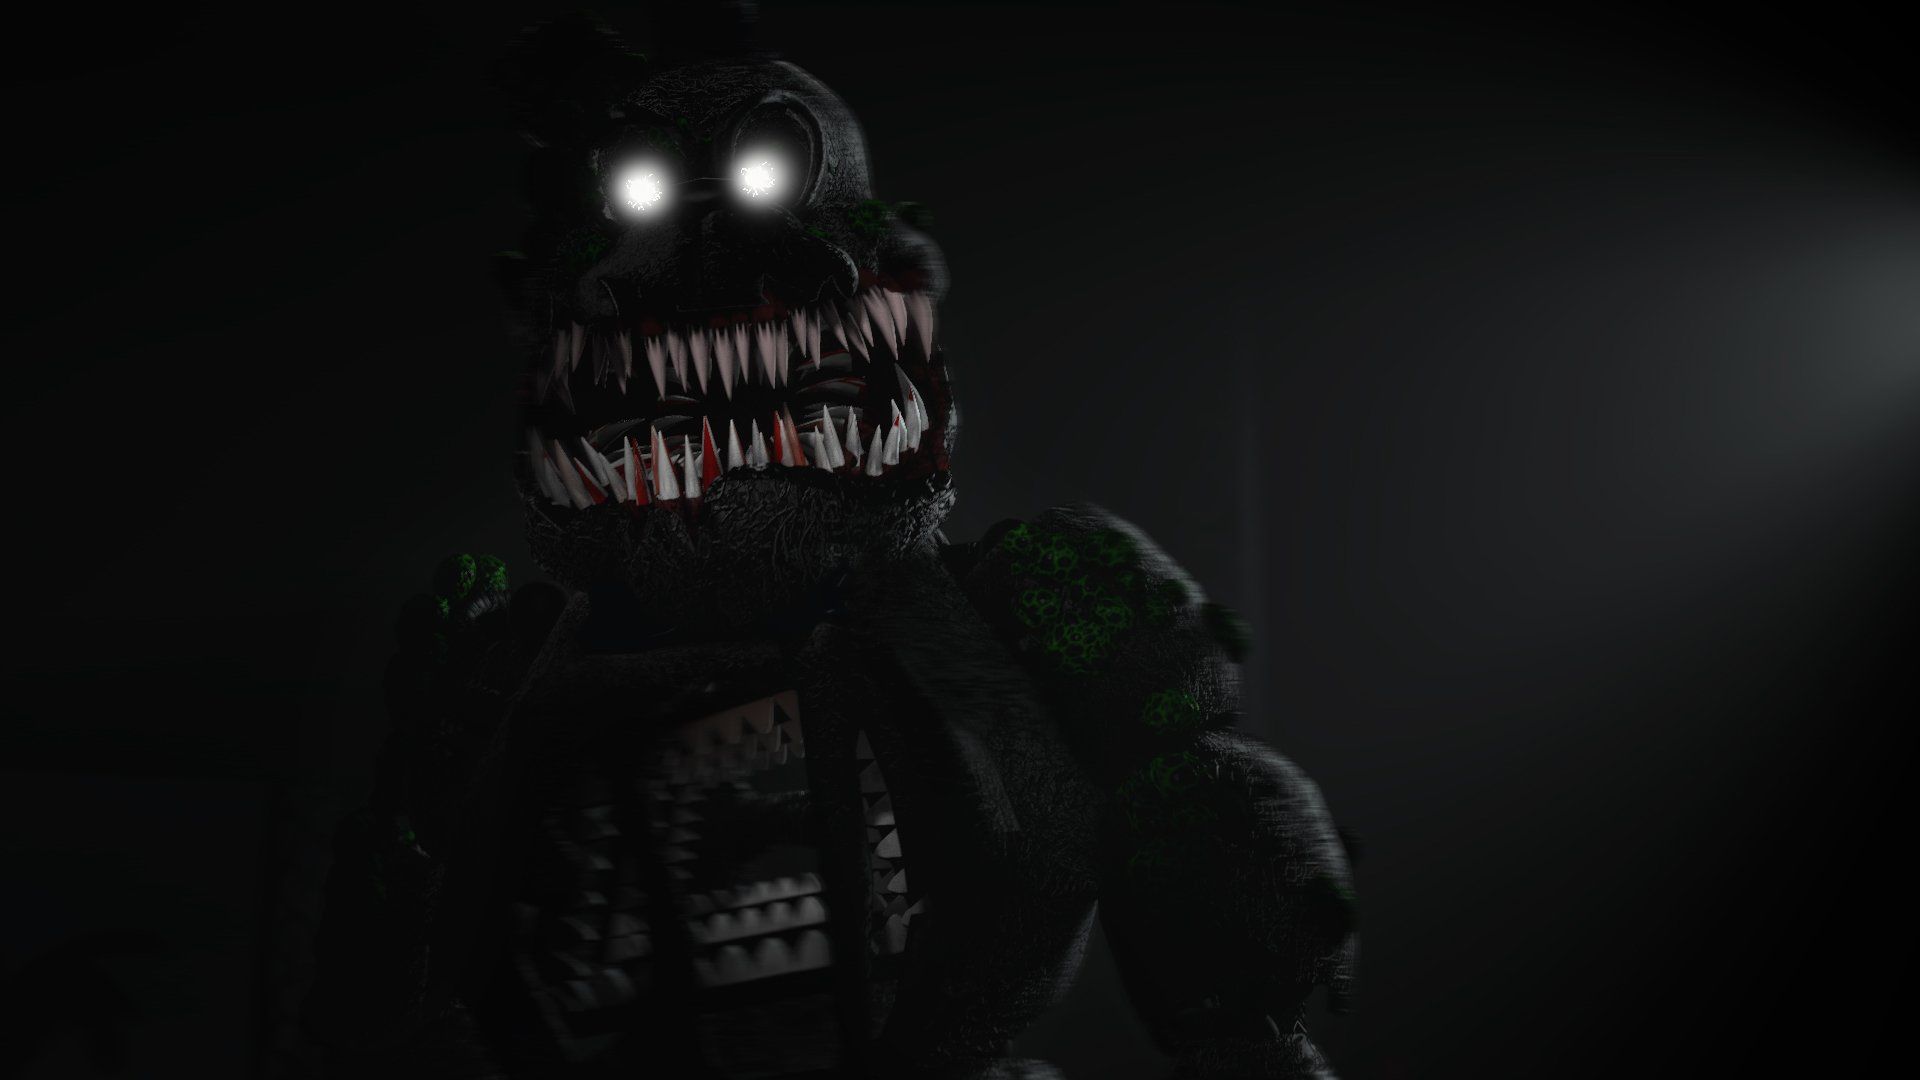 Secret4Studio weekly set of preview image to the first episode of Five Nights at Freddy's: The Twisted Ones Series has been released Patreon and YouTube channel members as always get additional unique behind the scene materials